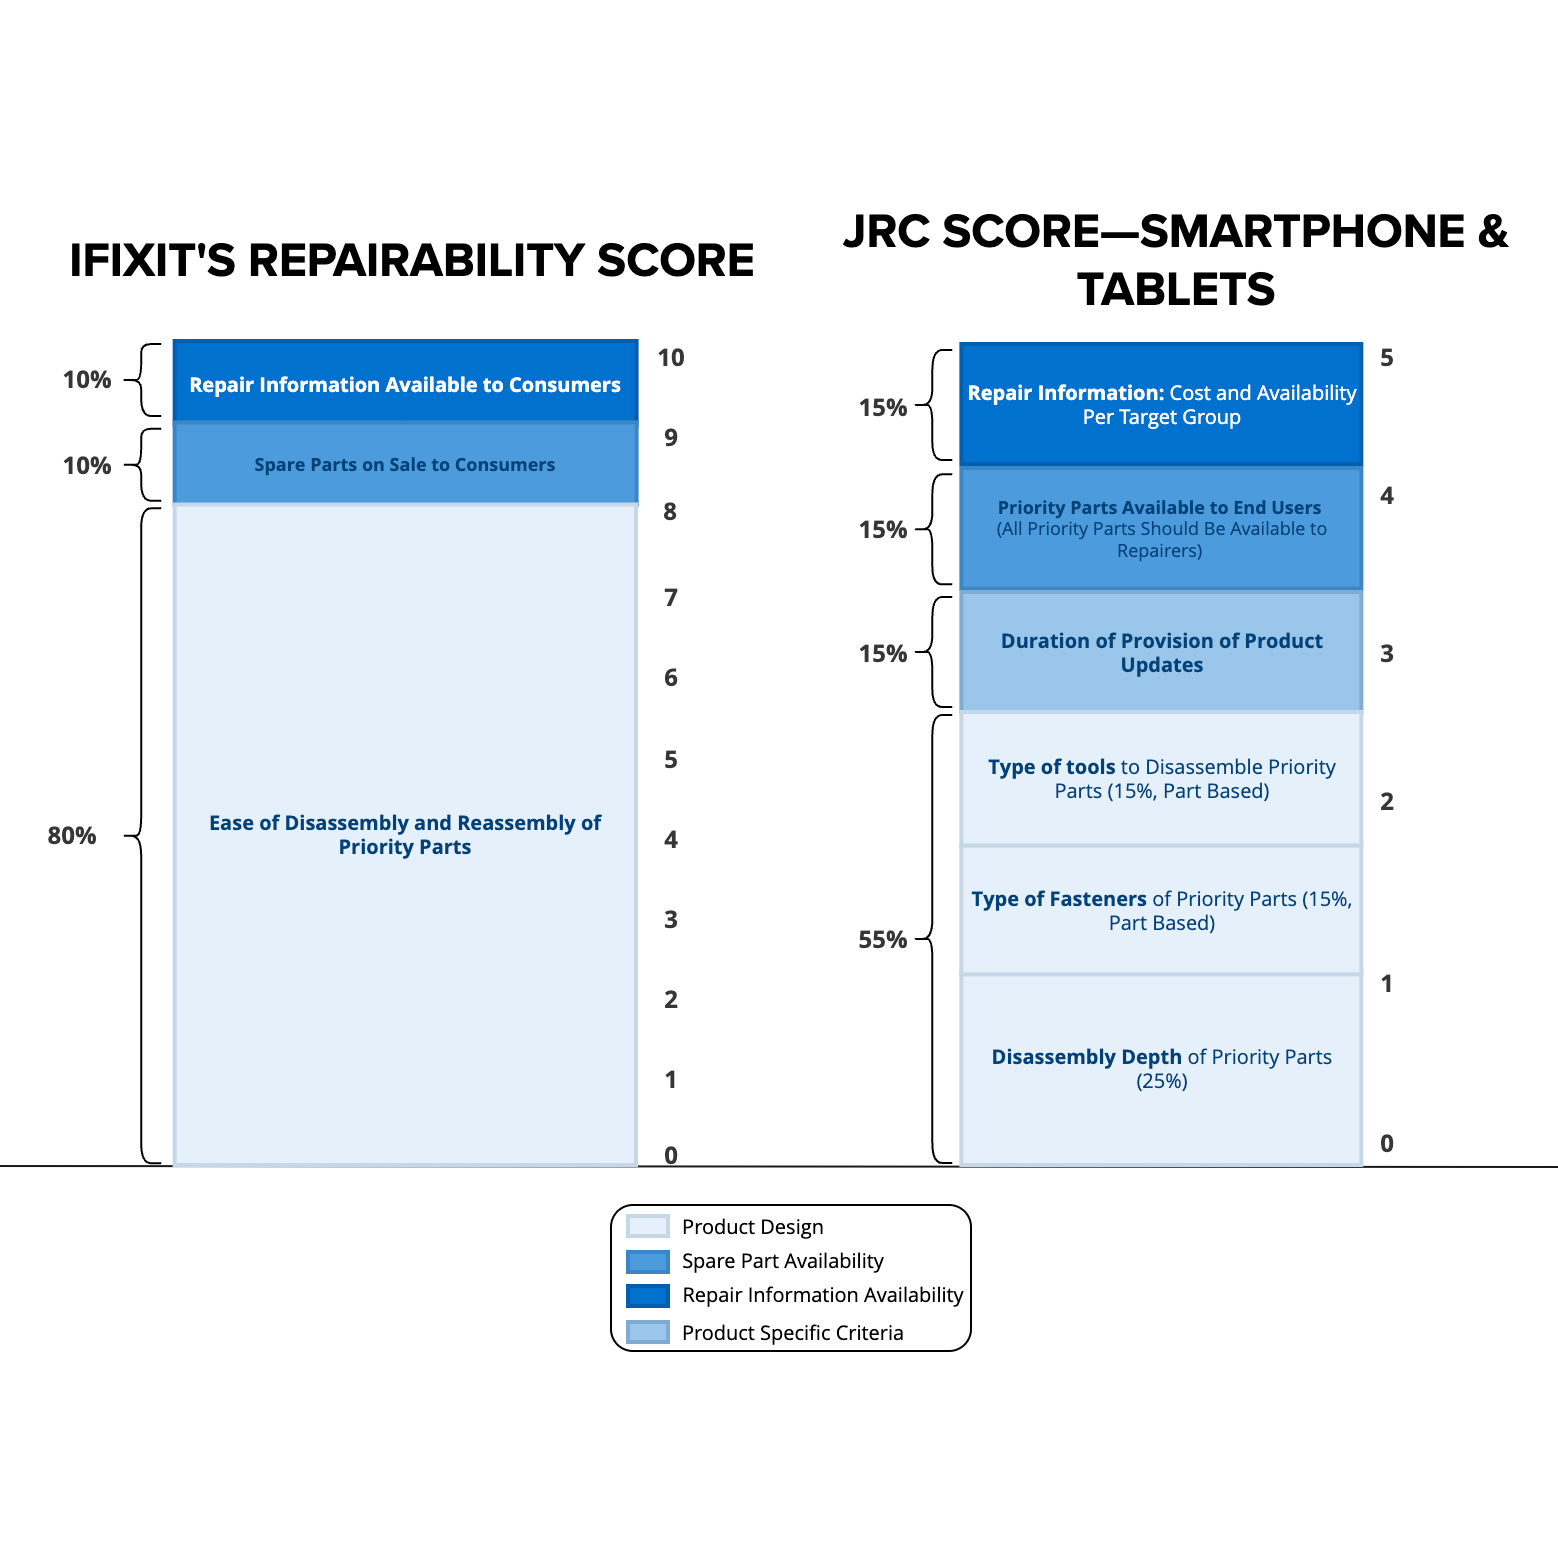 How Does the JRC Approach to Repairability Scoring Differ from iFixit’s?